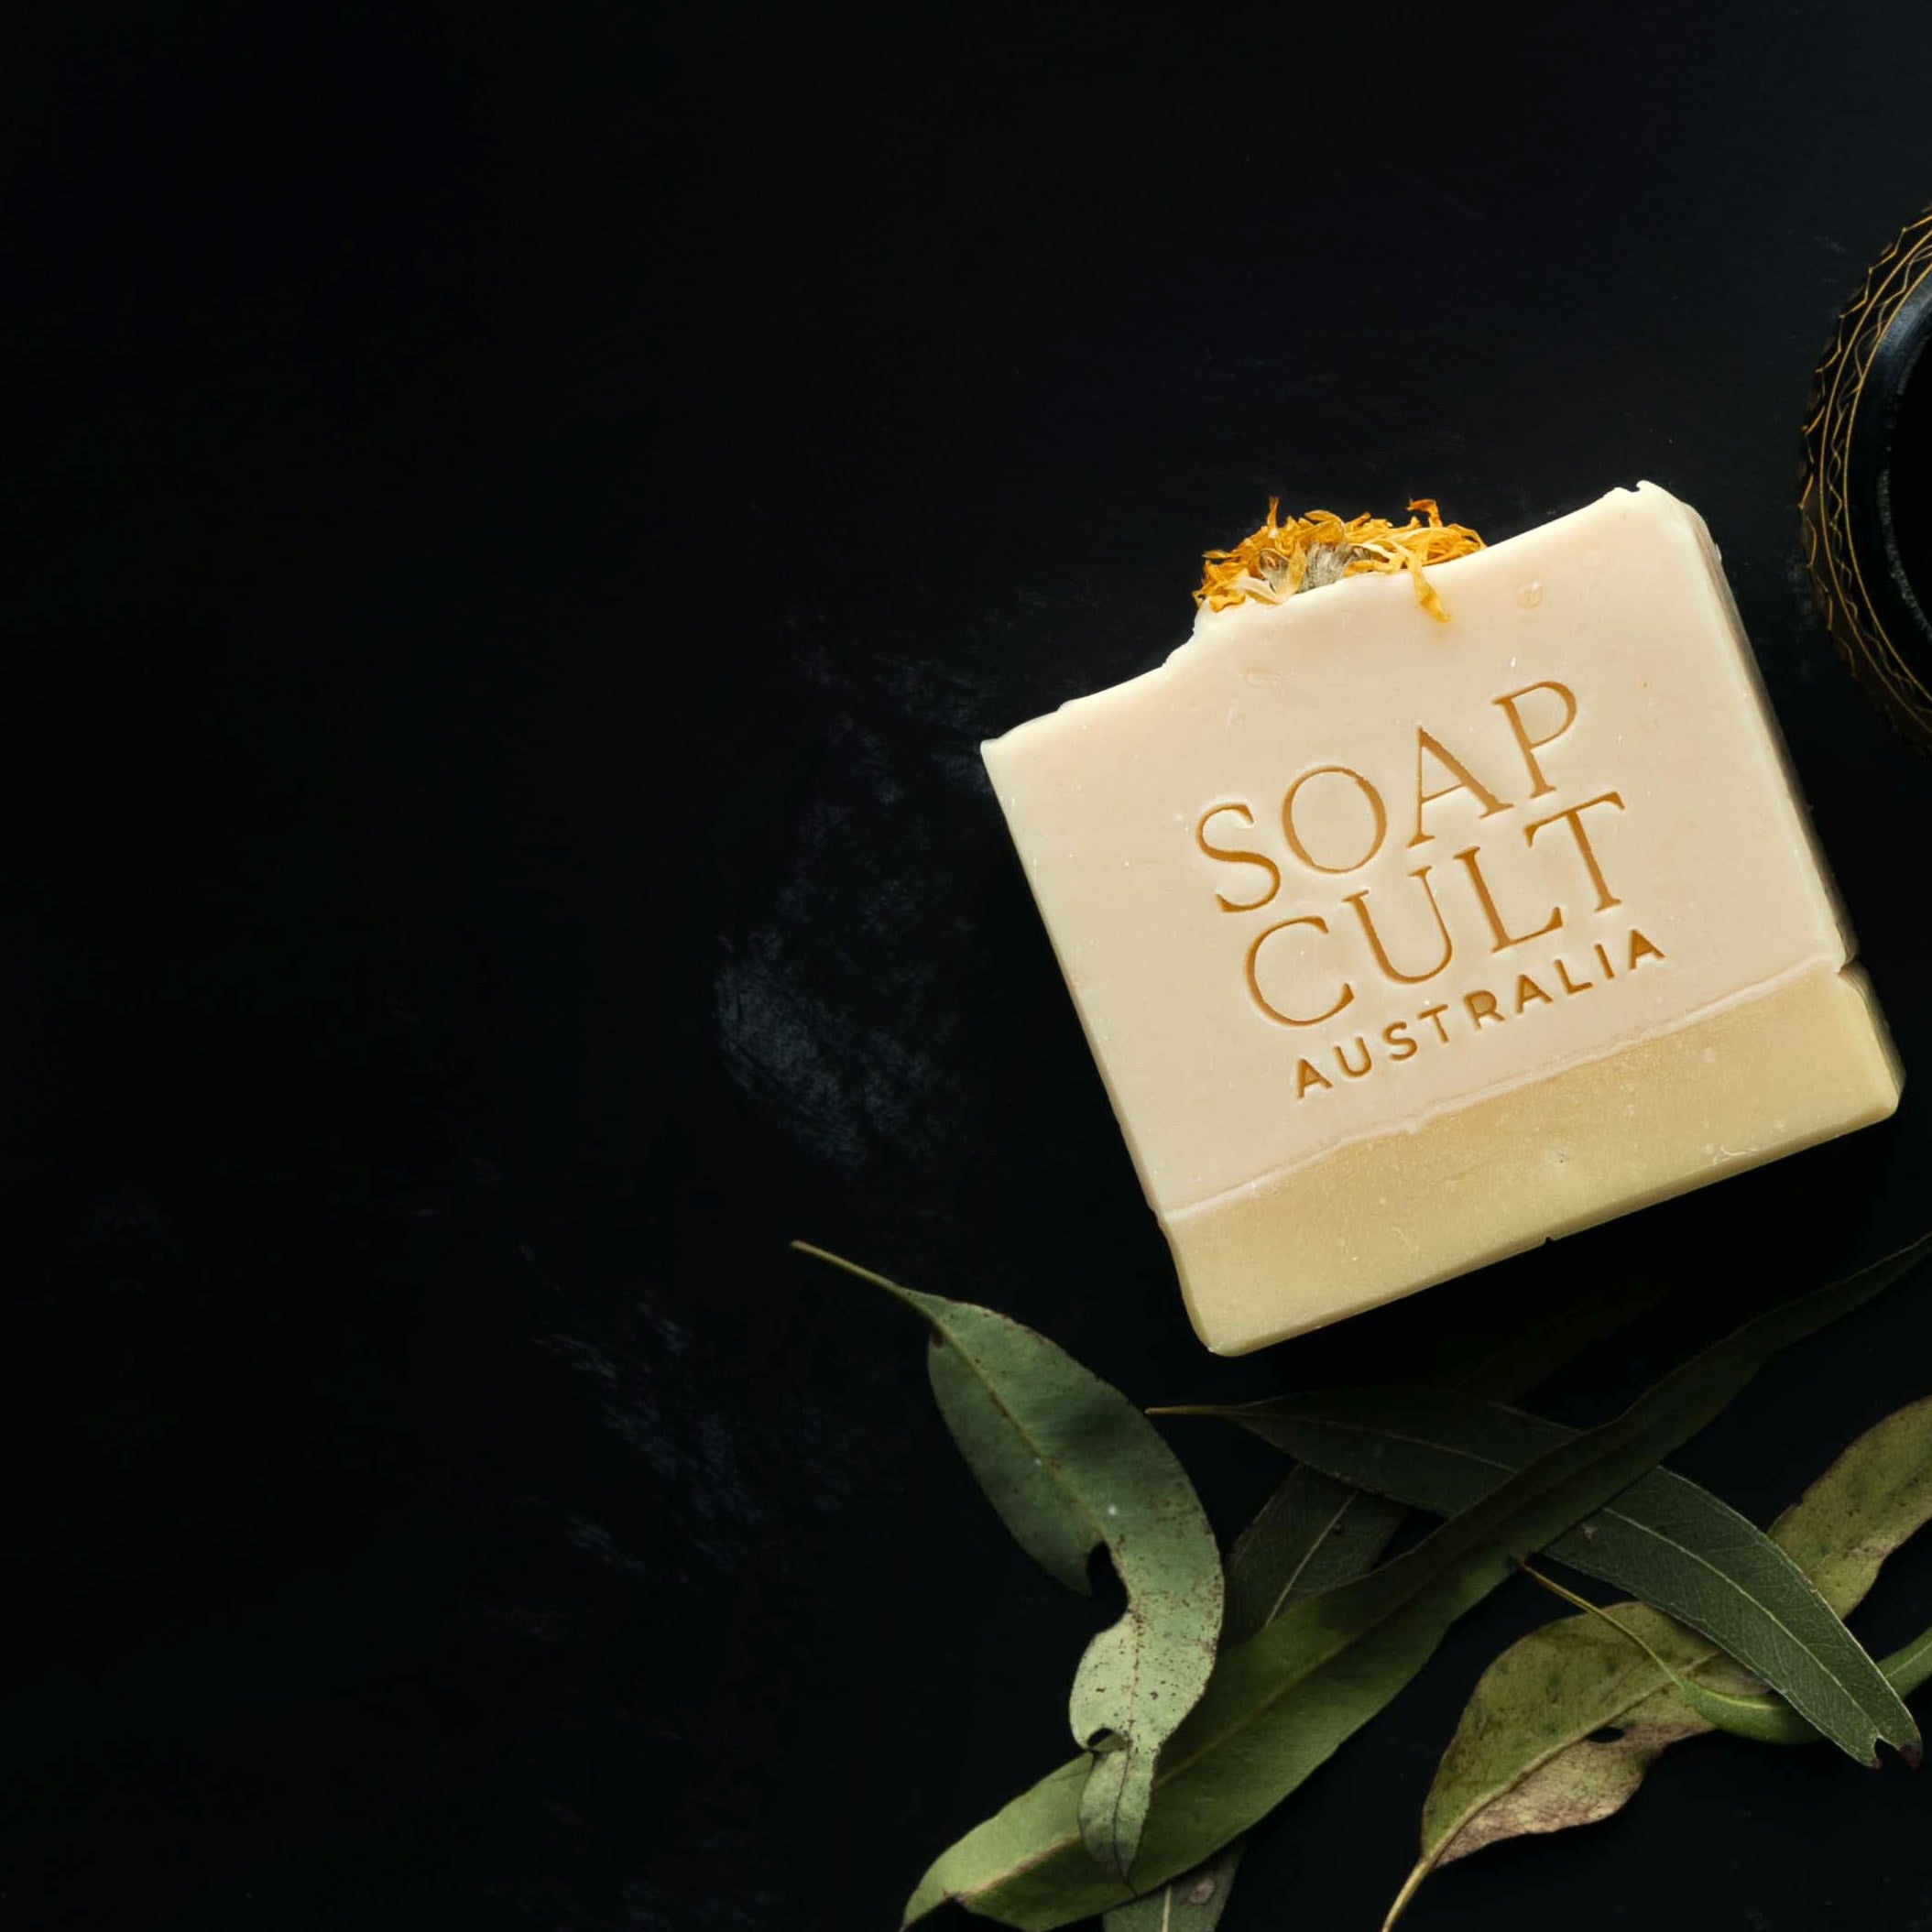 golden dawn lemon myrtle soap with caledula flower on black background with gum leaves